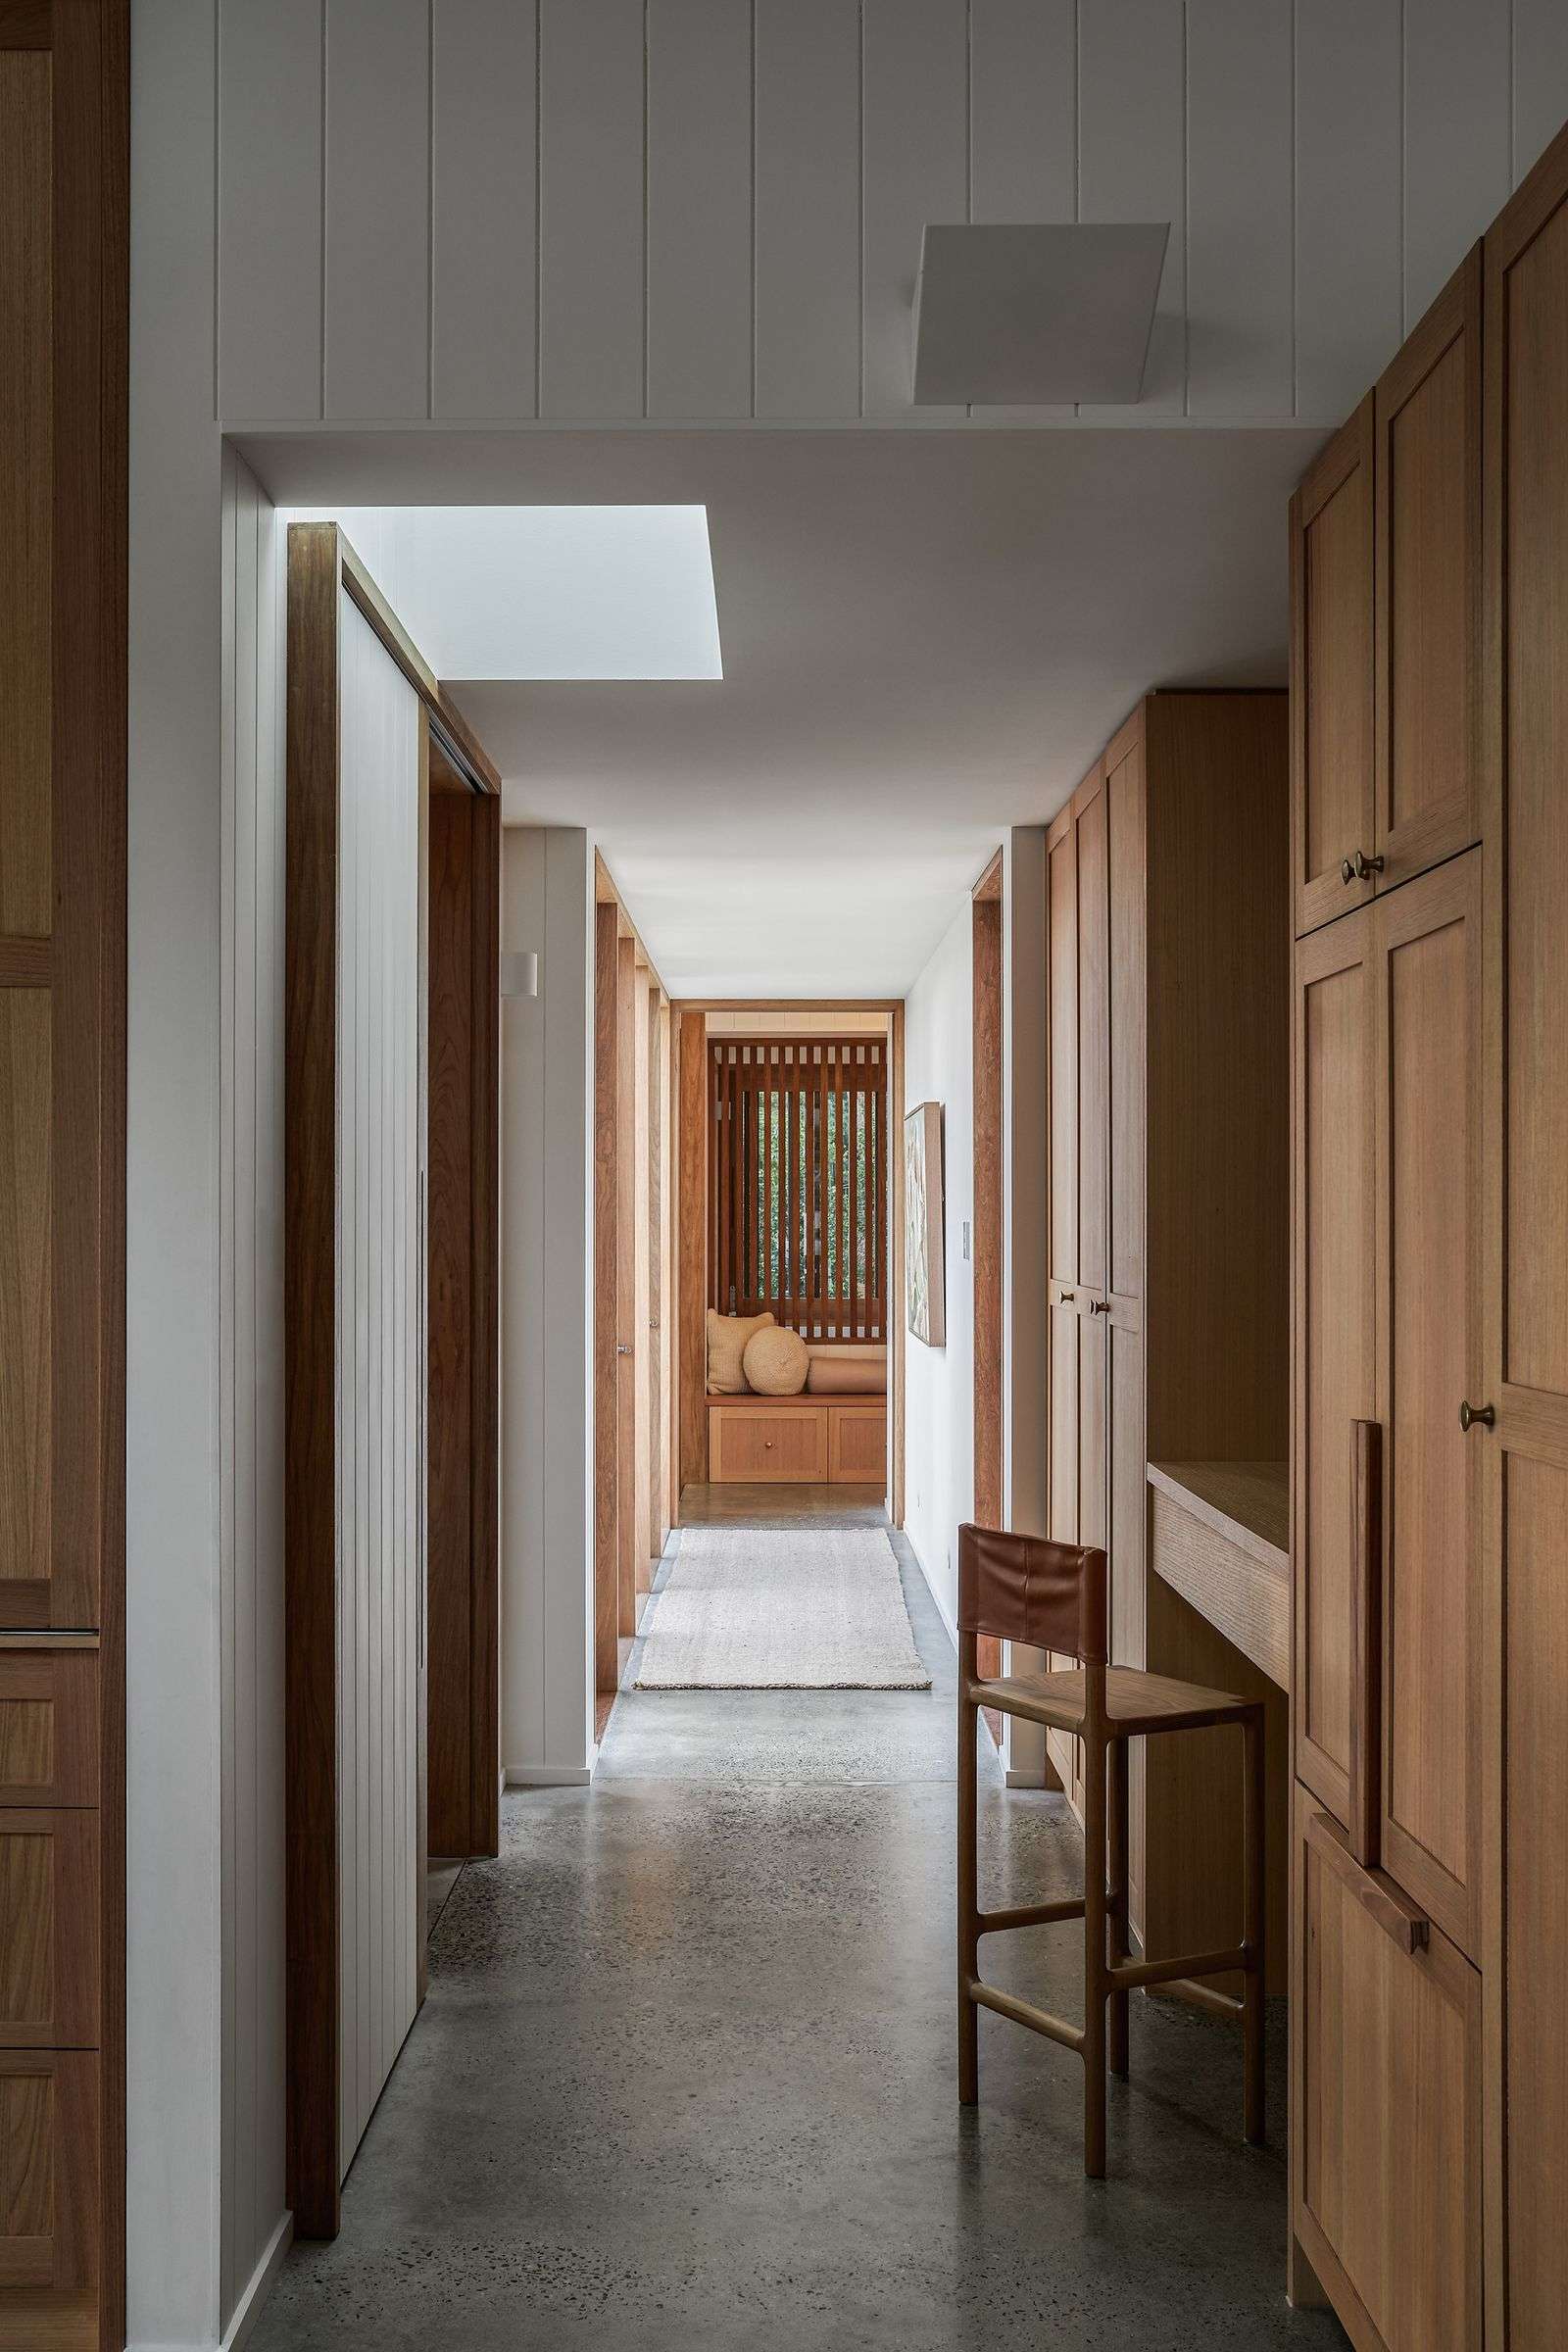 The Caretaker's by Aphora Architecture showing the hallway view